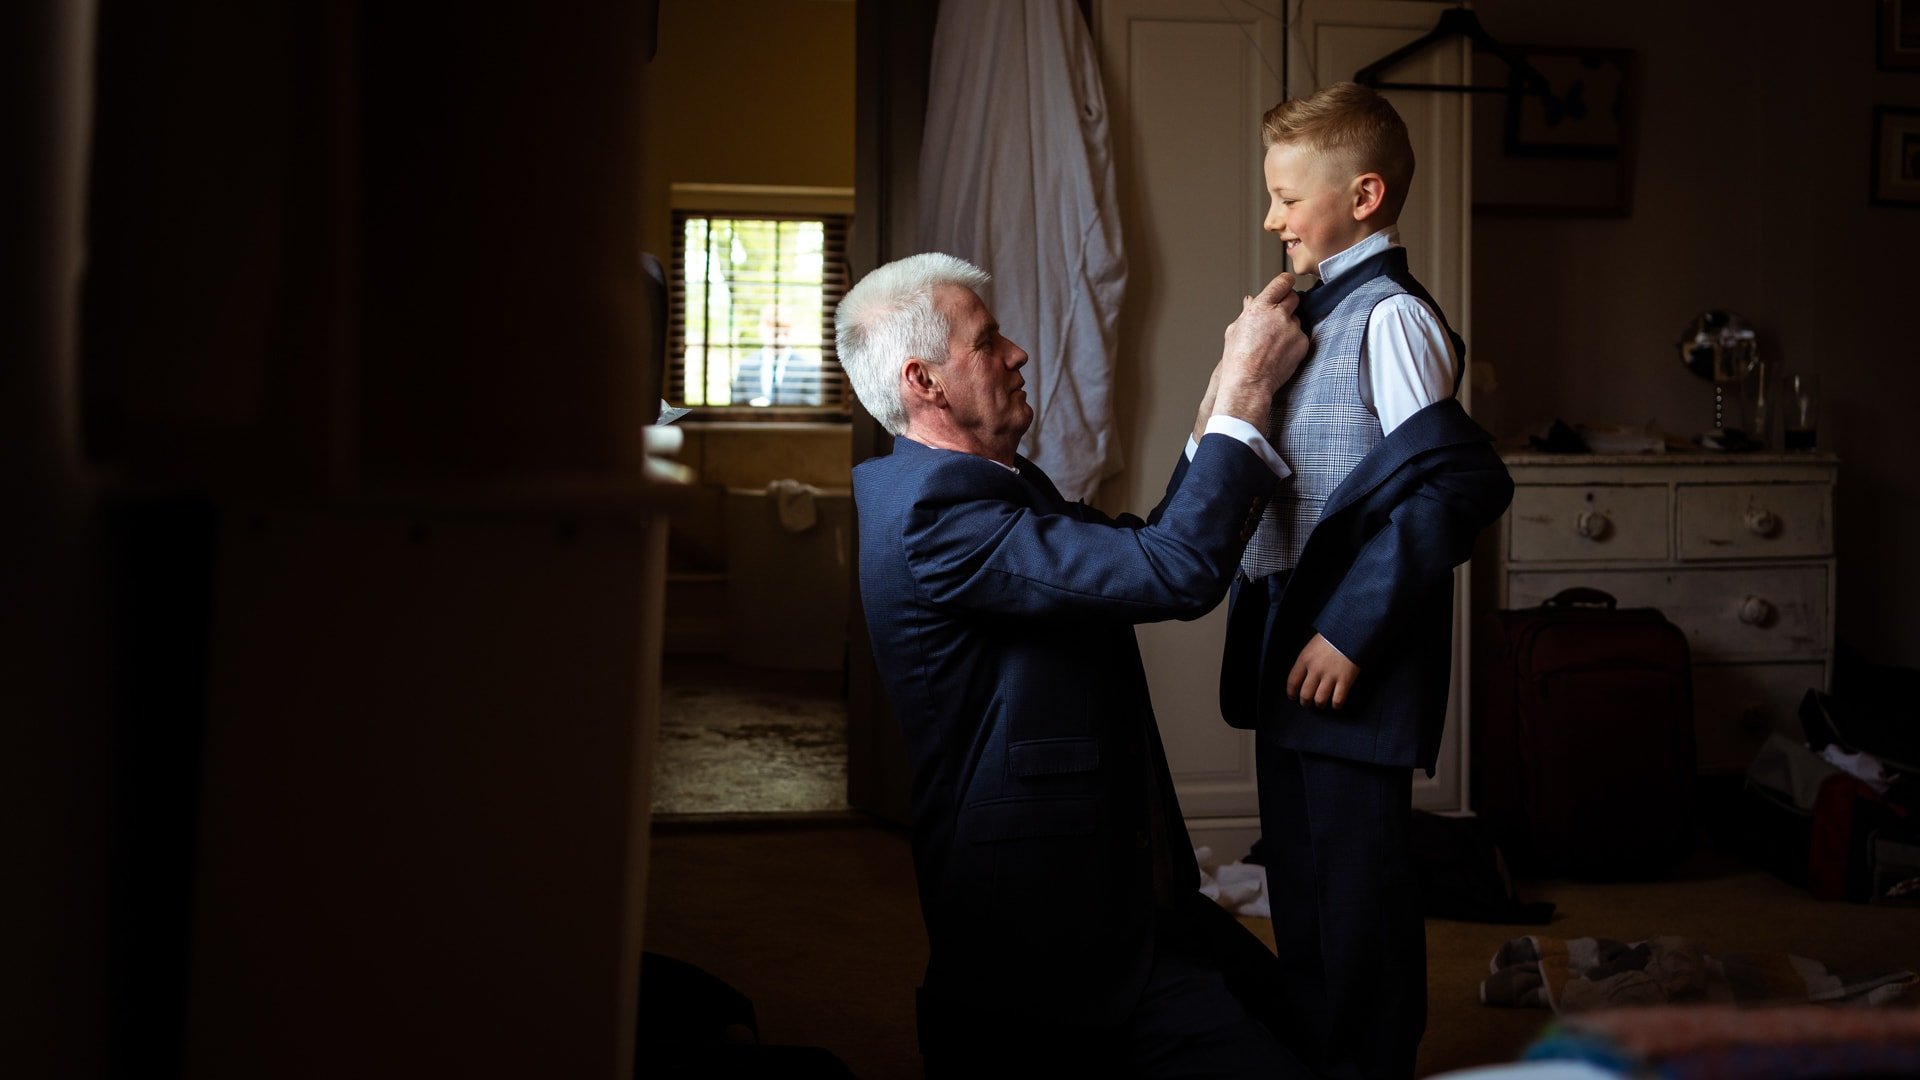 Father of bride doing grandsons tie up